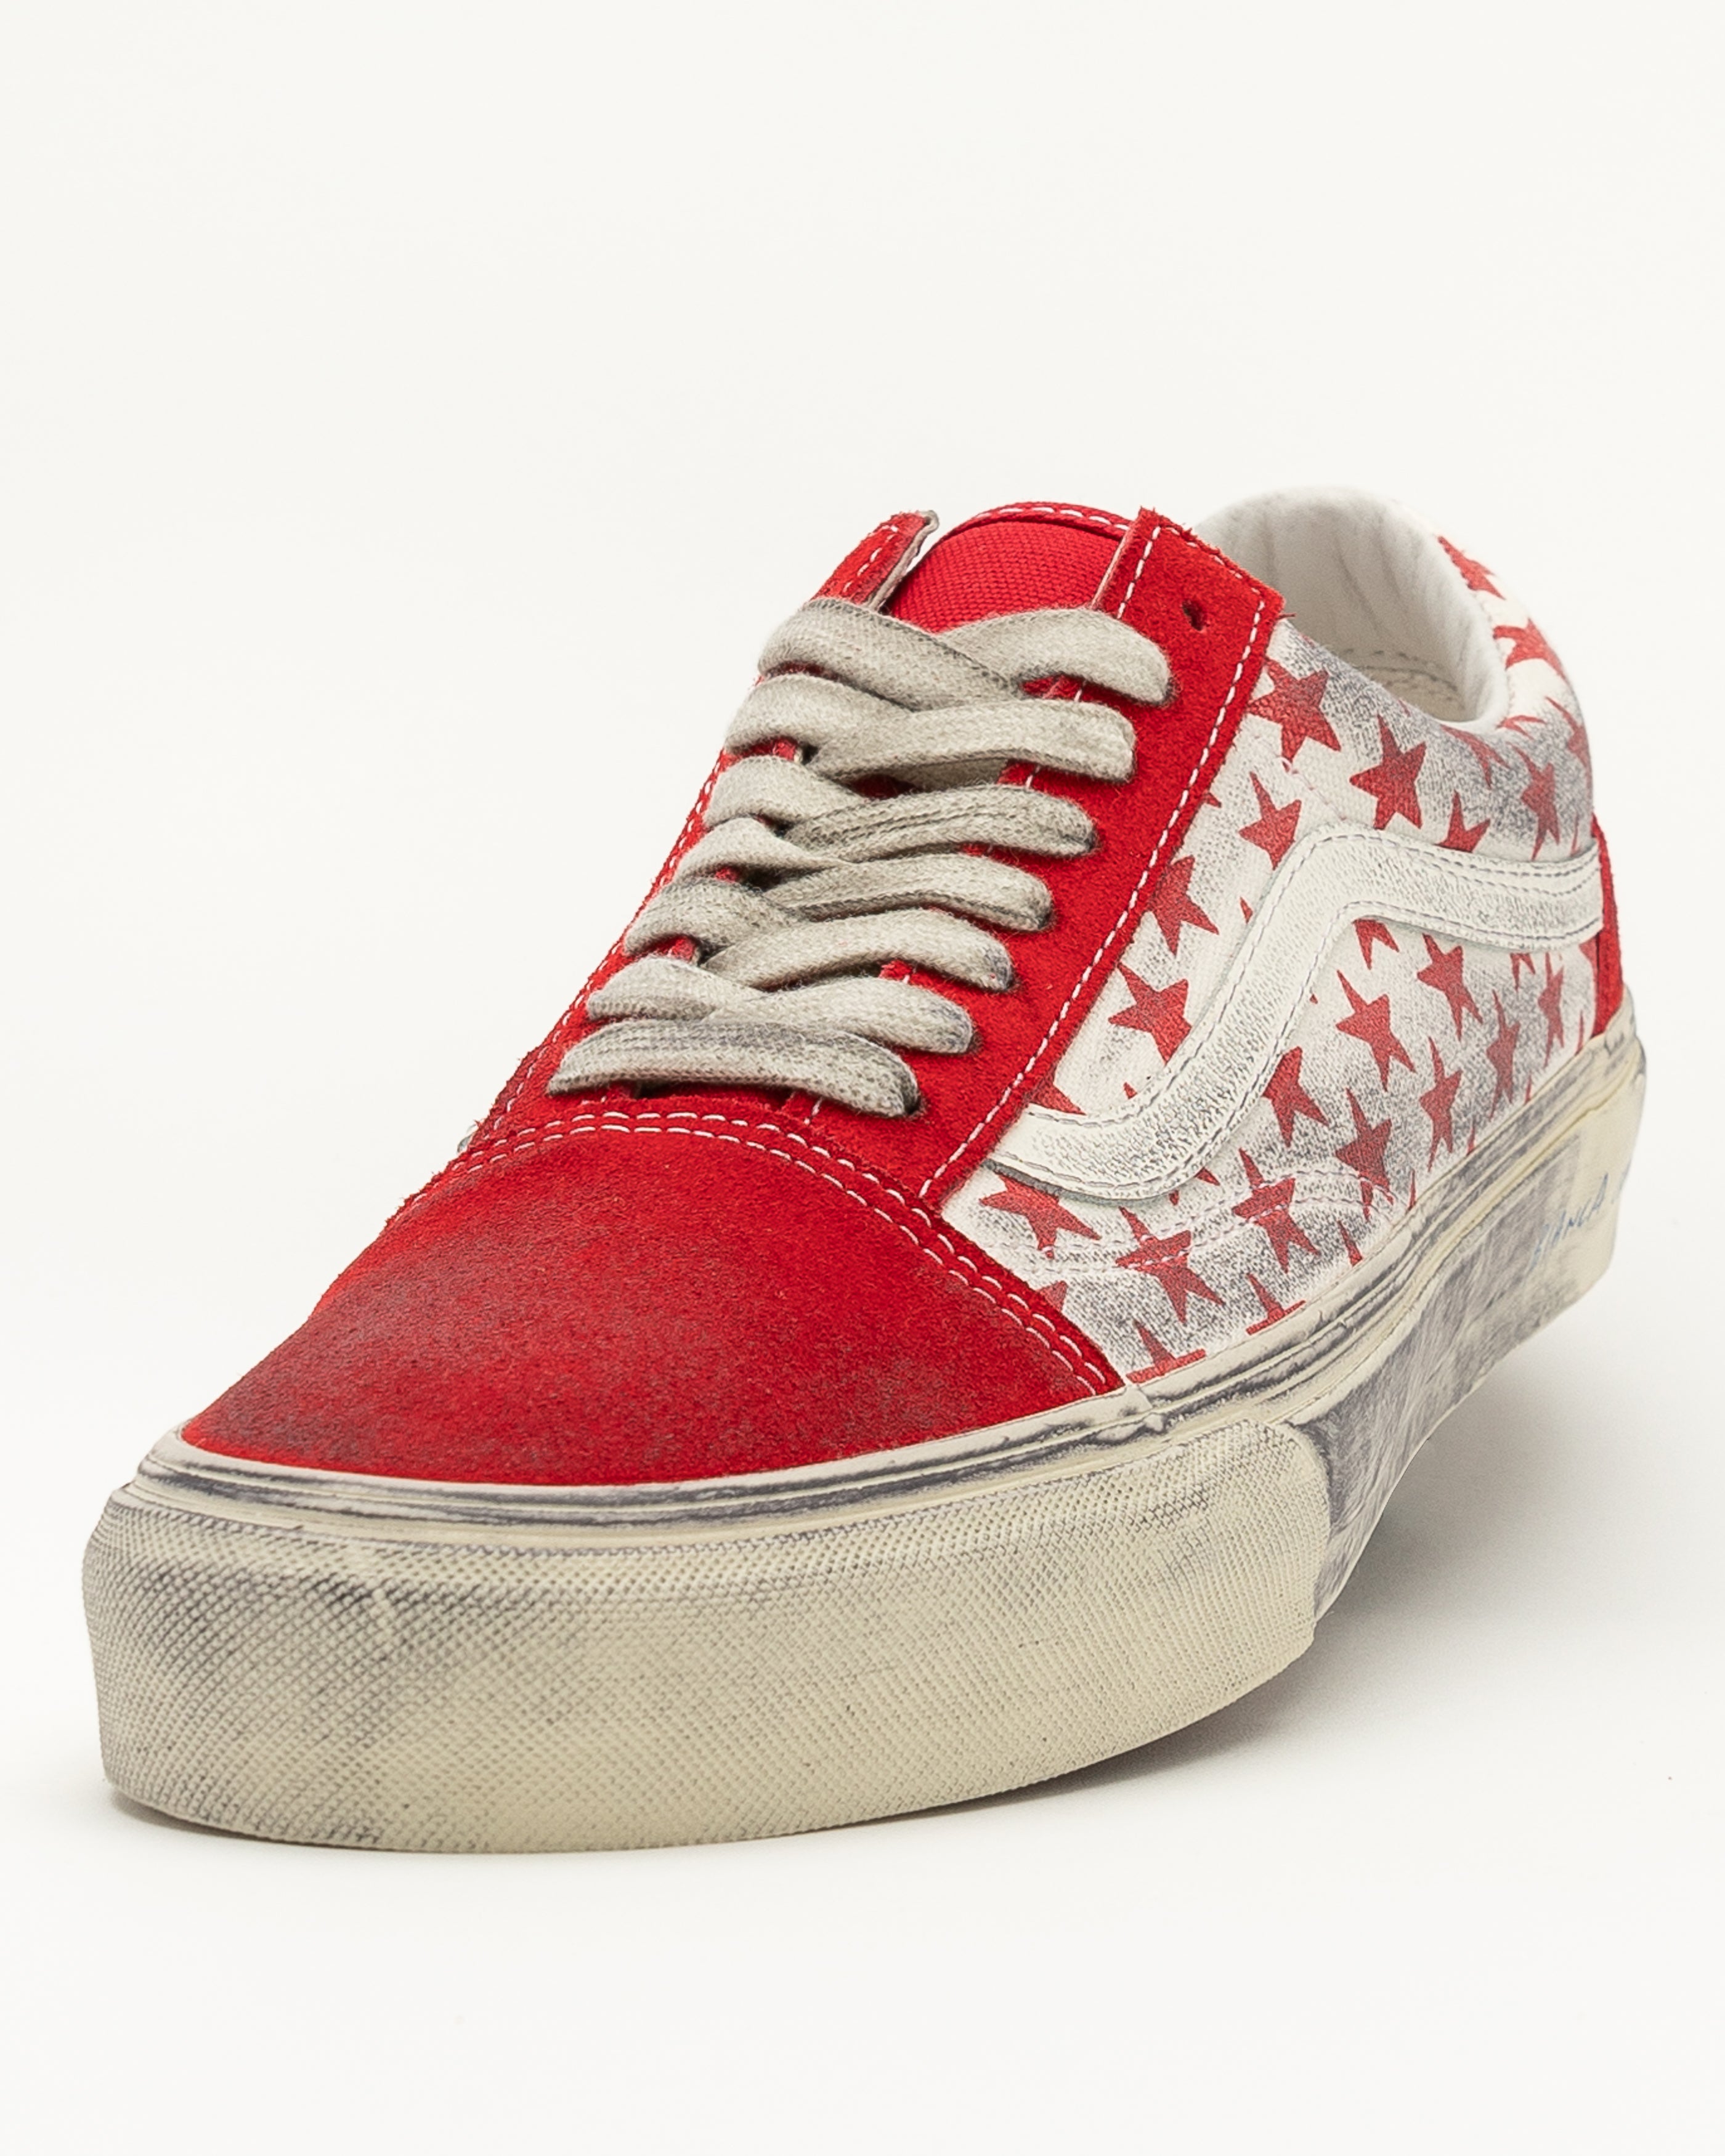 UA Old Skool VLT LX BIANCA CHANDON in Red and White